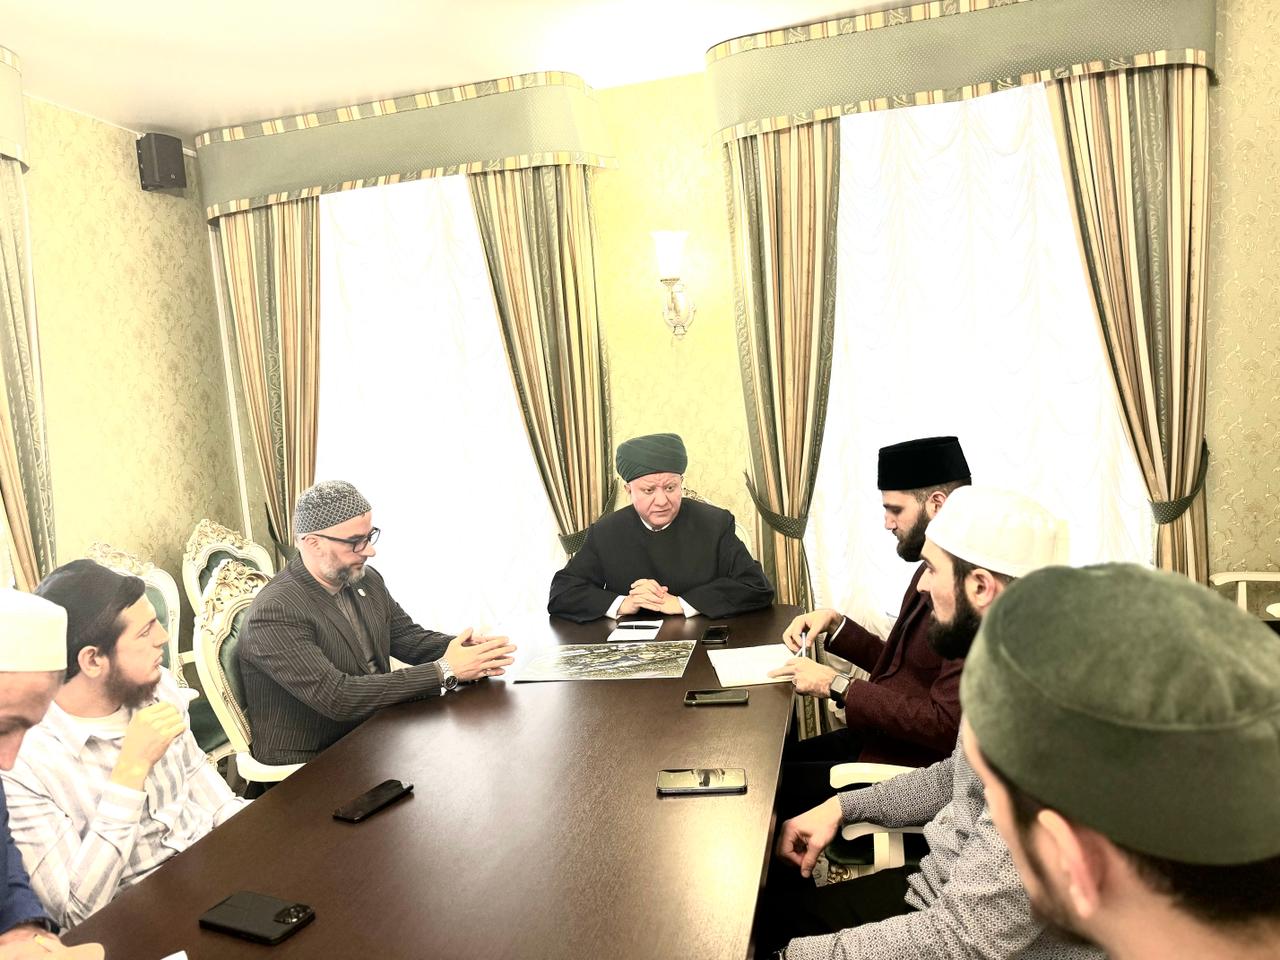 A MEETING OF THE SPIRITUAL ASSEMBLY OF MUSLIMS OF THE MOSCOW REGION WAS HELD AT THE RESIDENCE OF THE SAMR